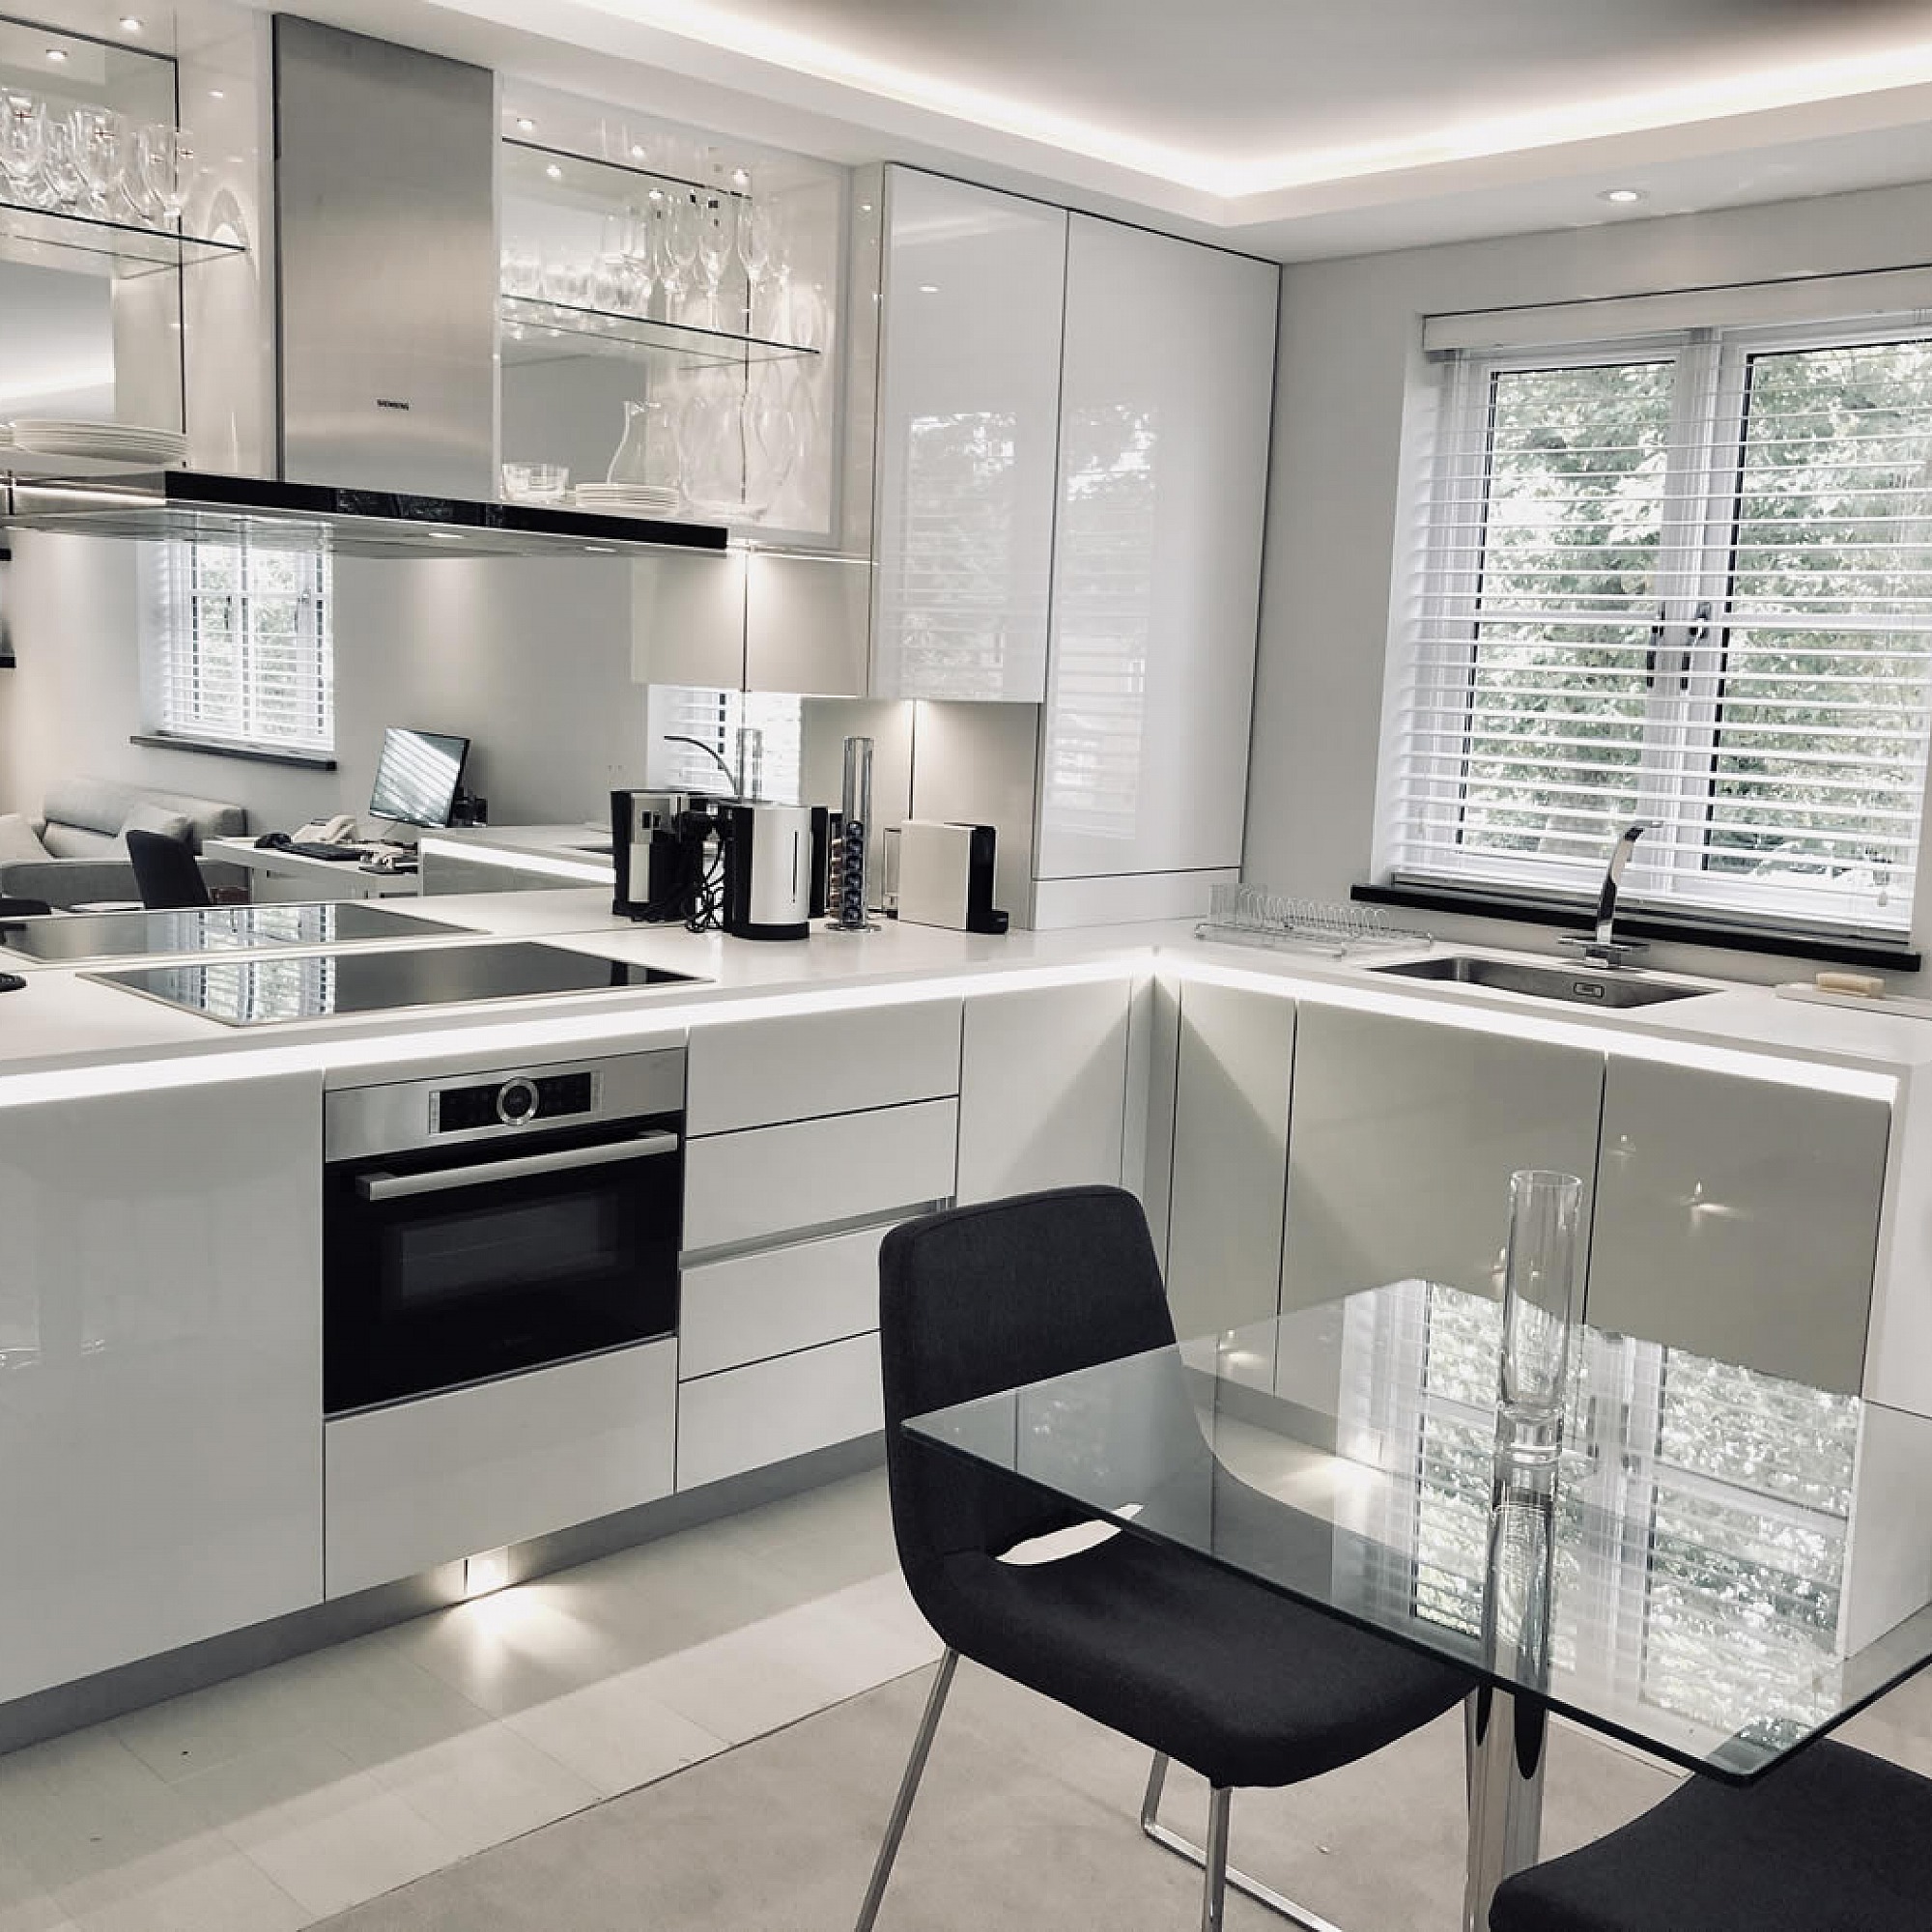 Designer White Kitchen for London pied-a-terre apartment, units are Hacker-Systemat high gloss grey lacquer with the upper units in high gloss white